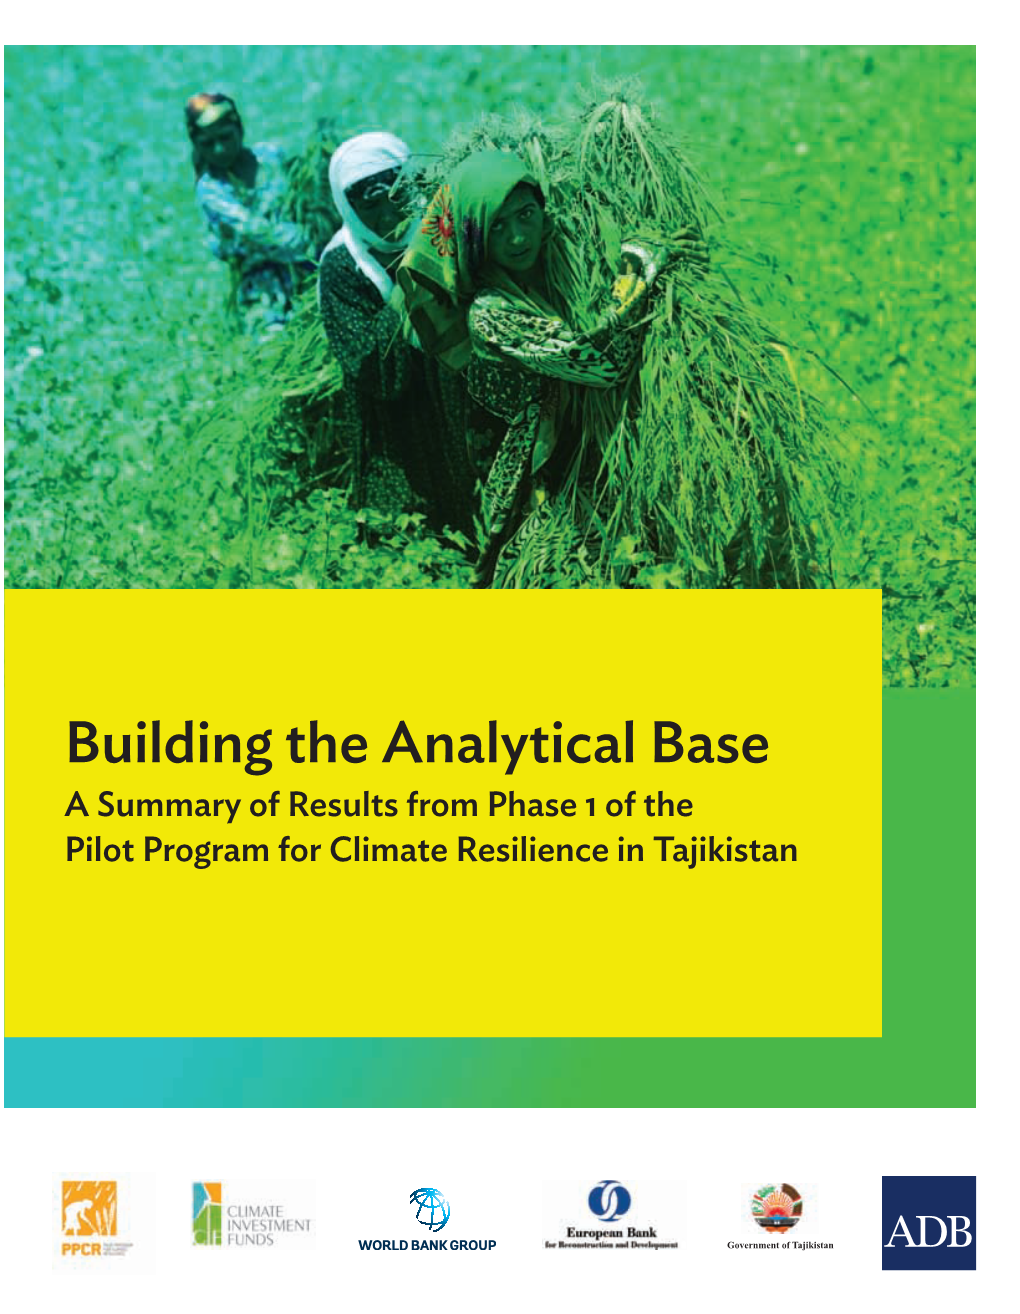 Building the Analytical Base: a Summary of Results from Phase 1 of the Pilot Program for Climate Resilience in Tajikistan